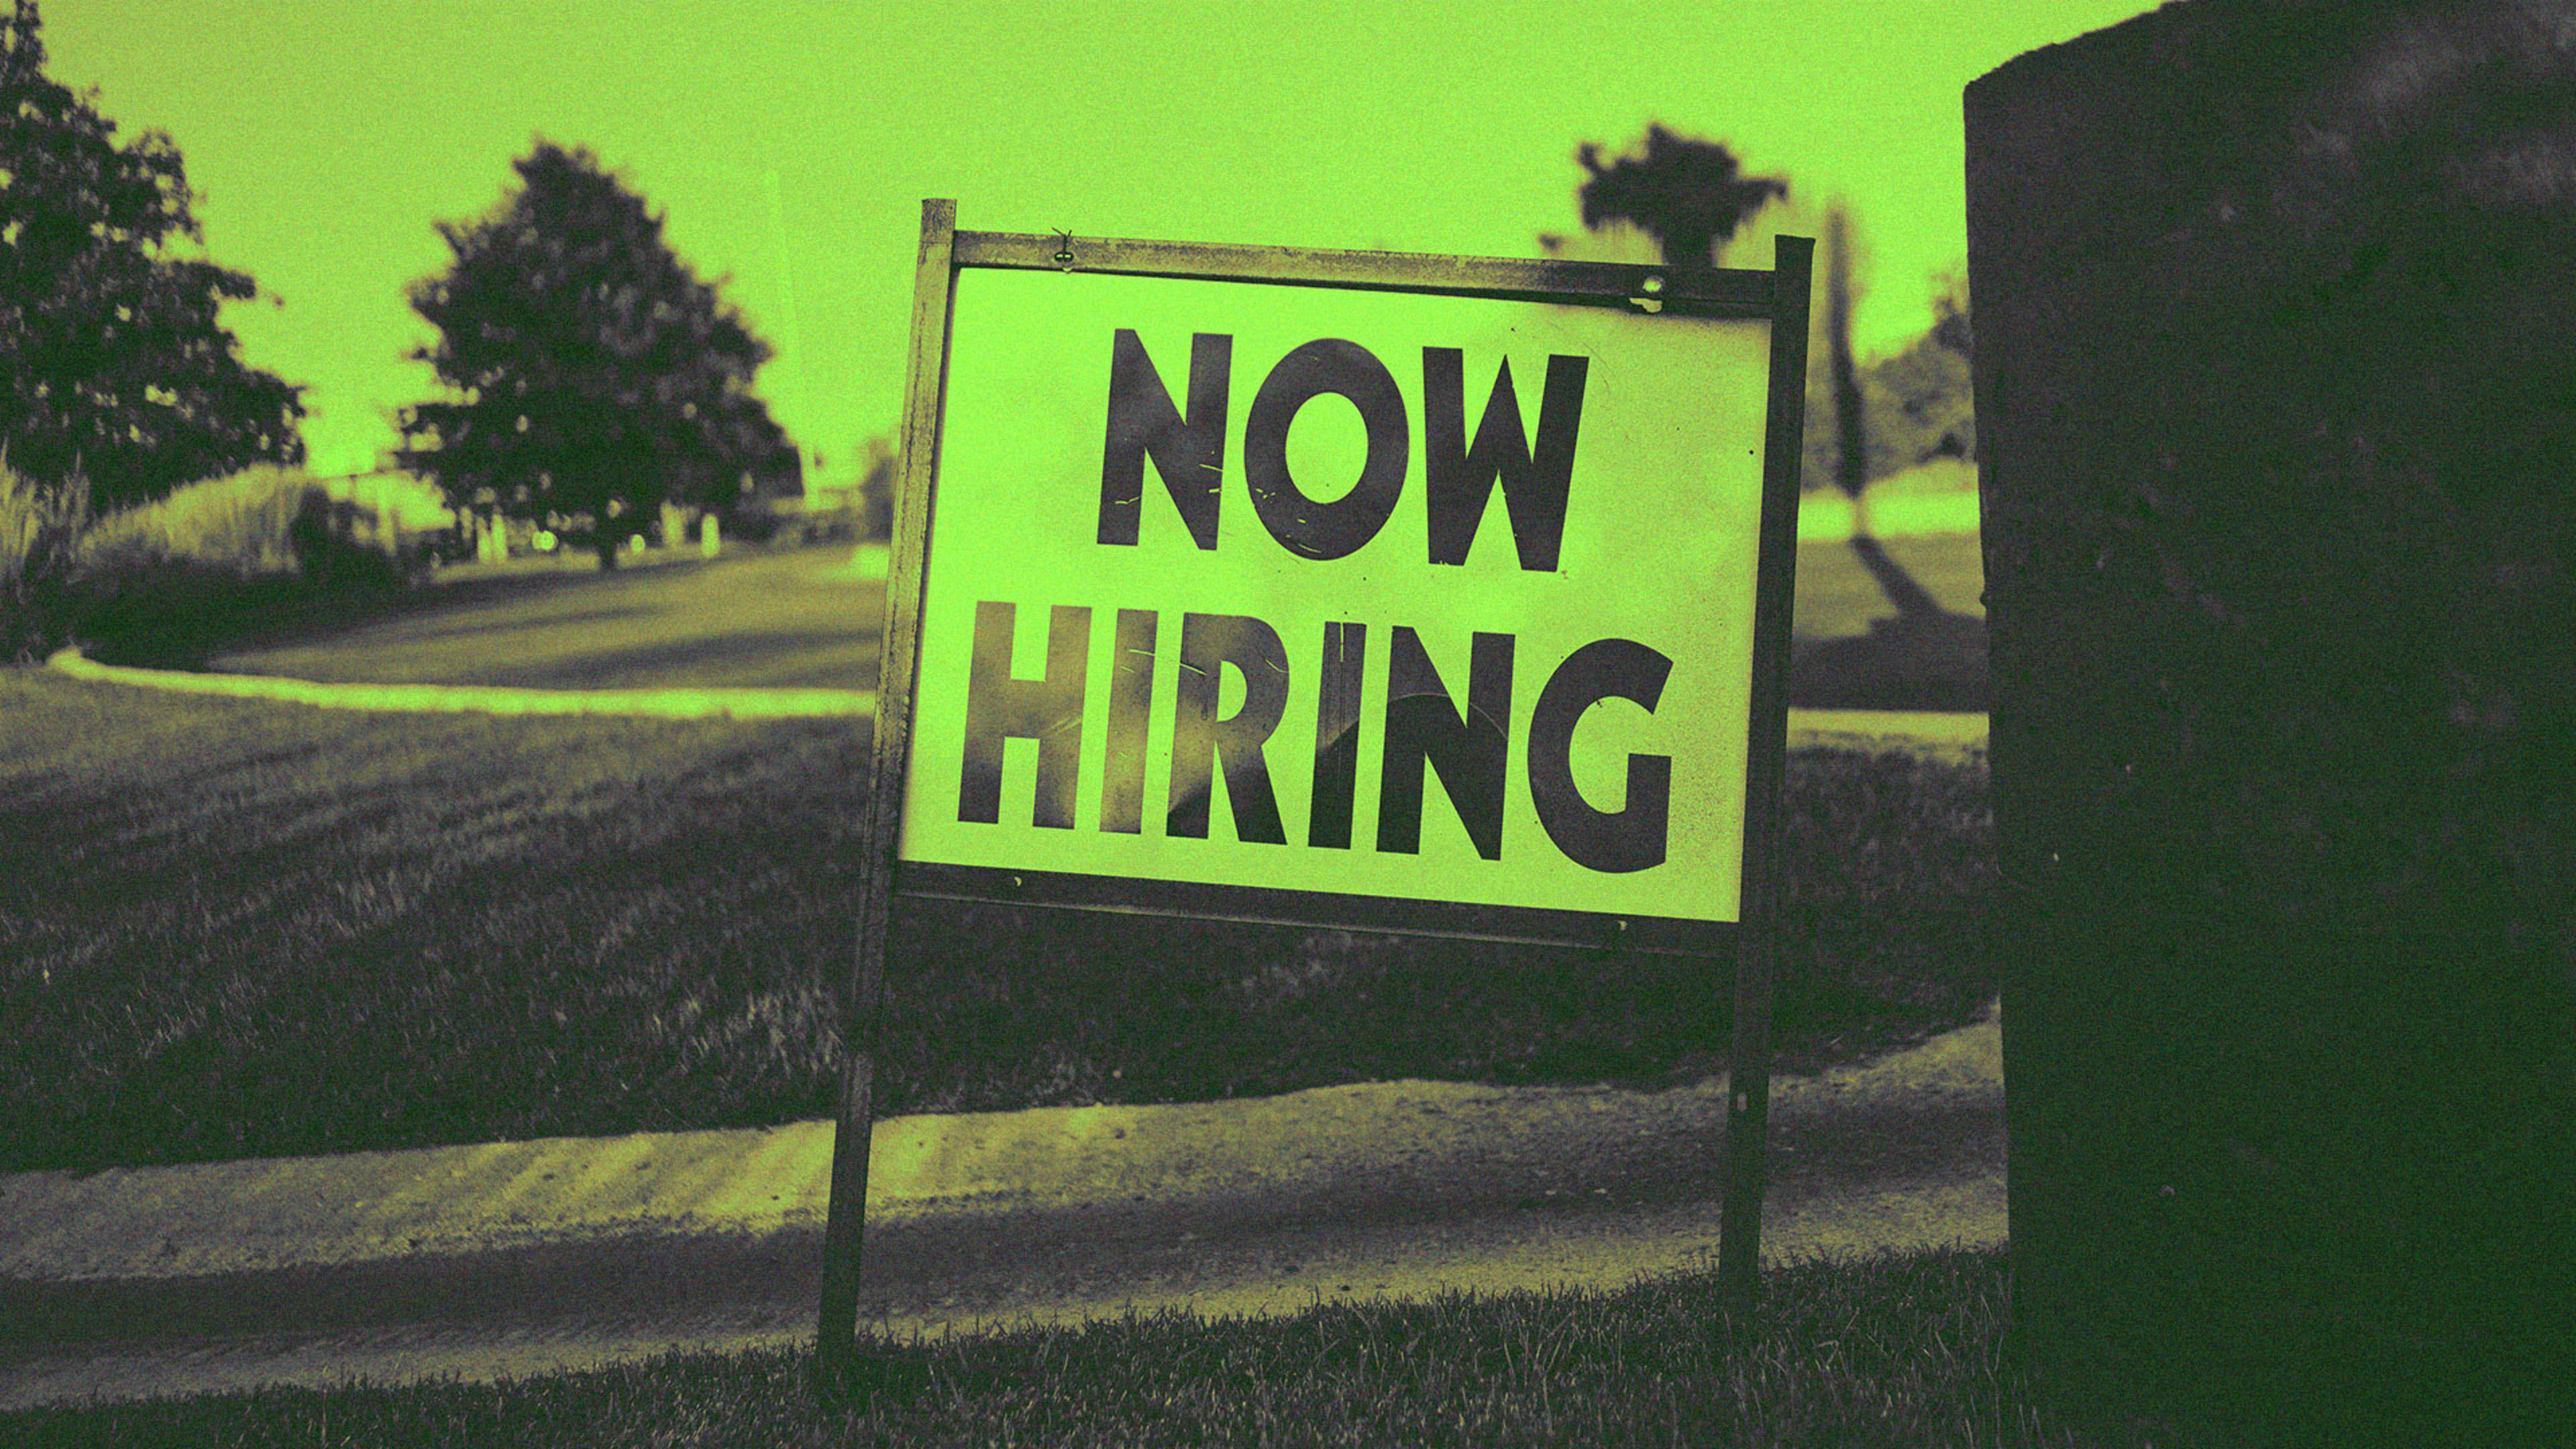 Open hiring might be the recruitment solution you need right now